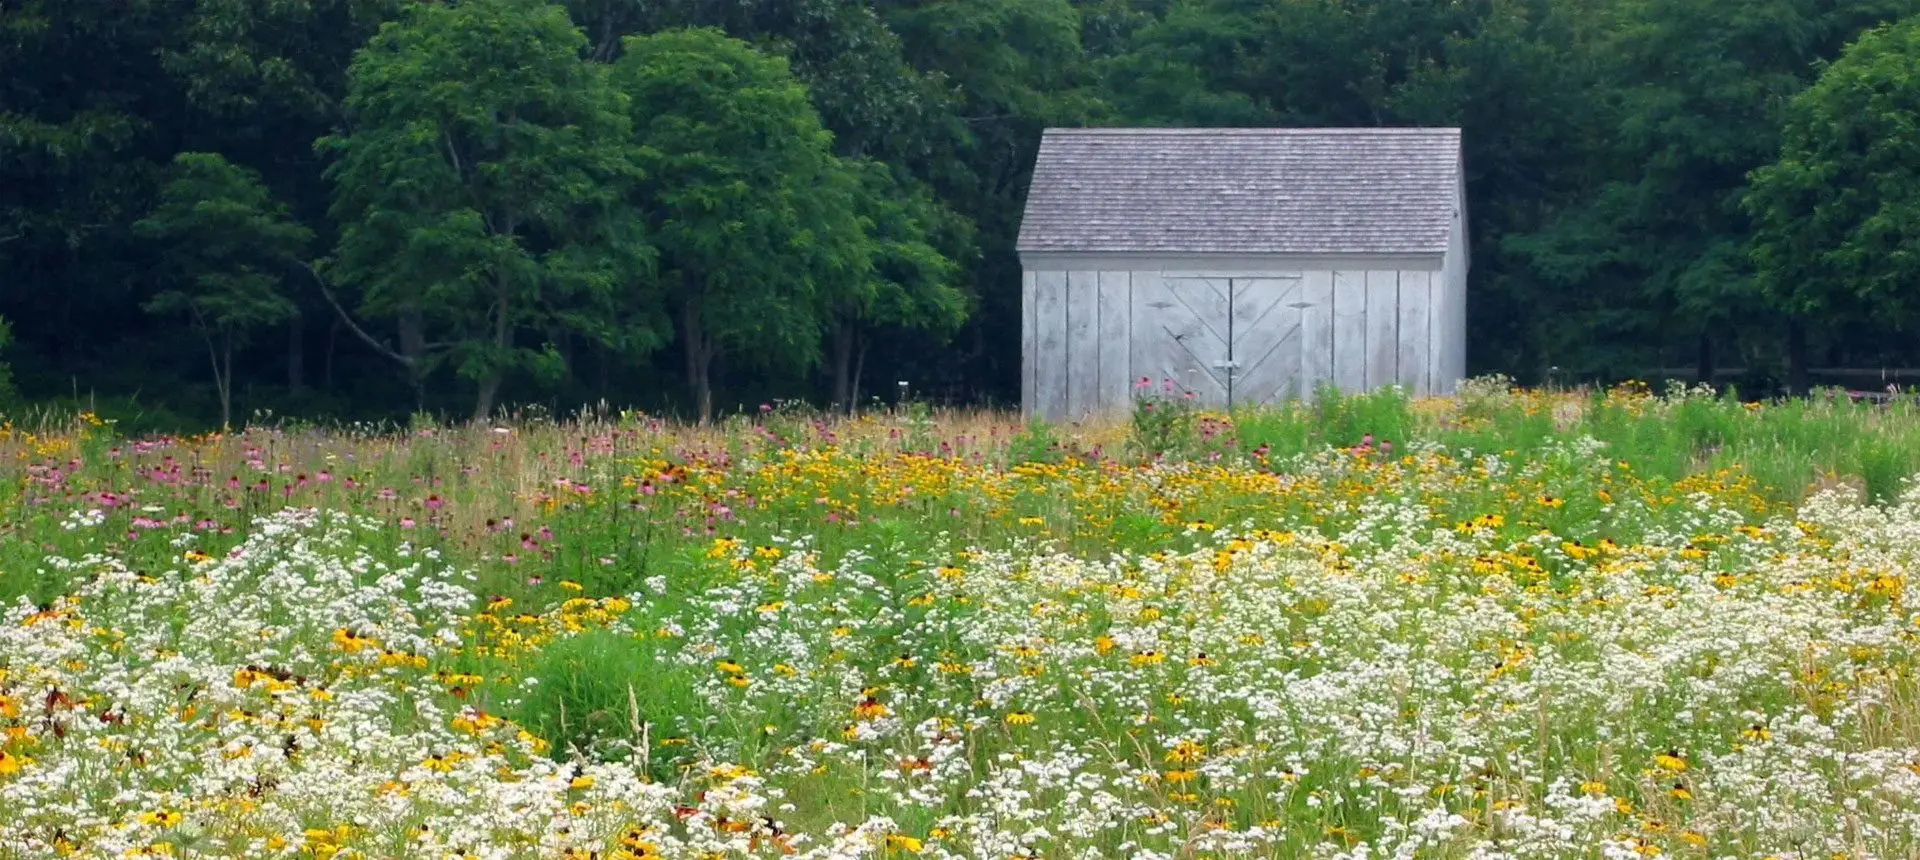 A field of flowers with a barn in the background.